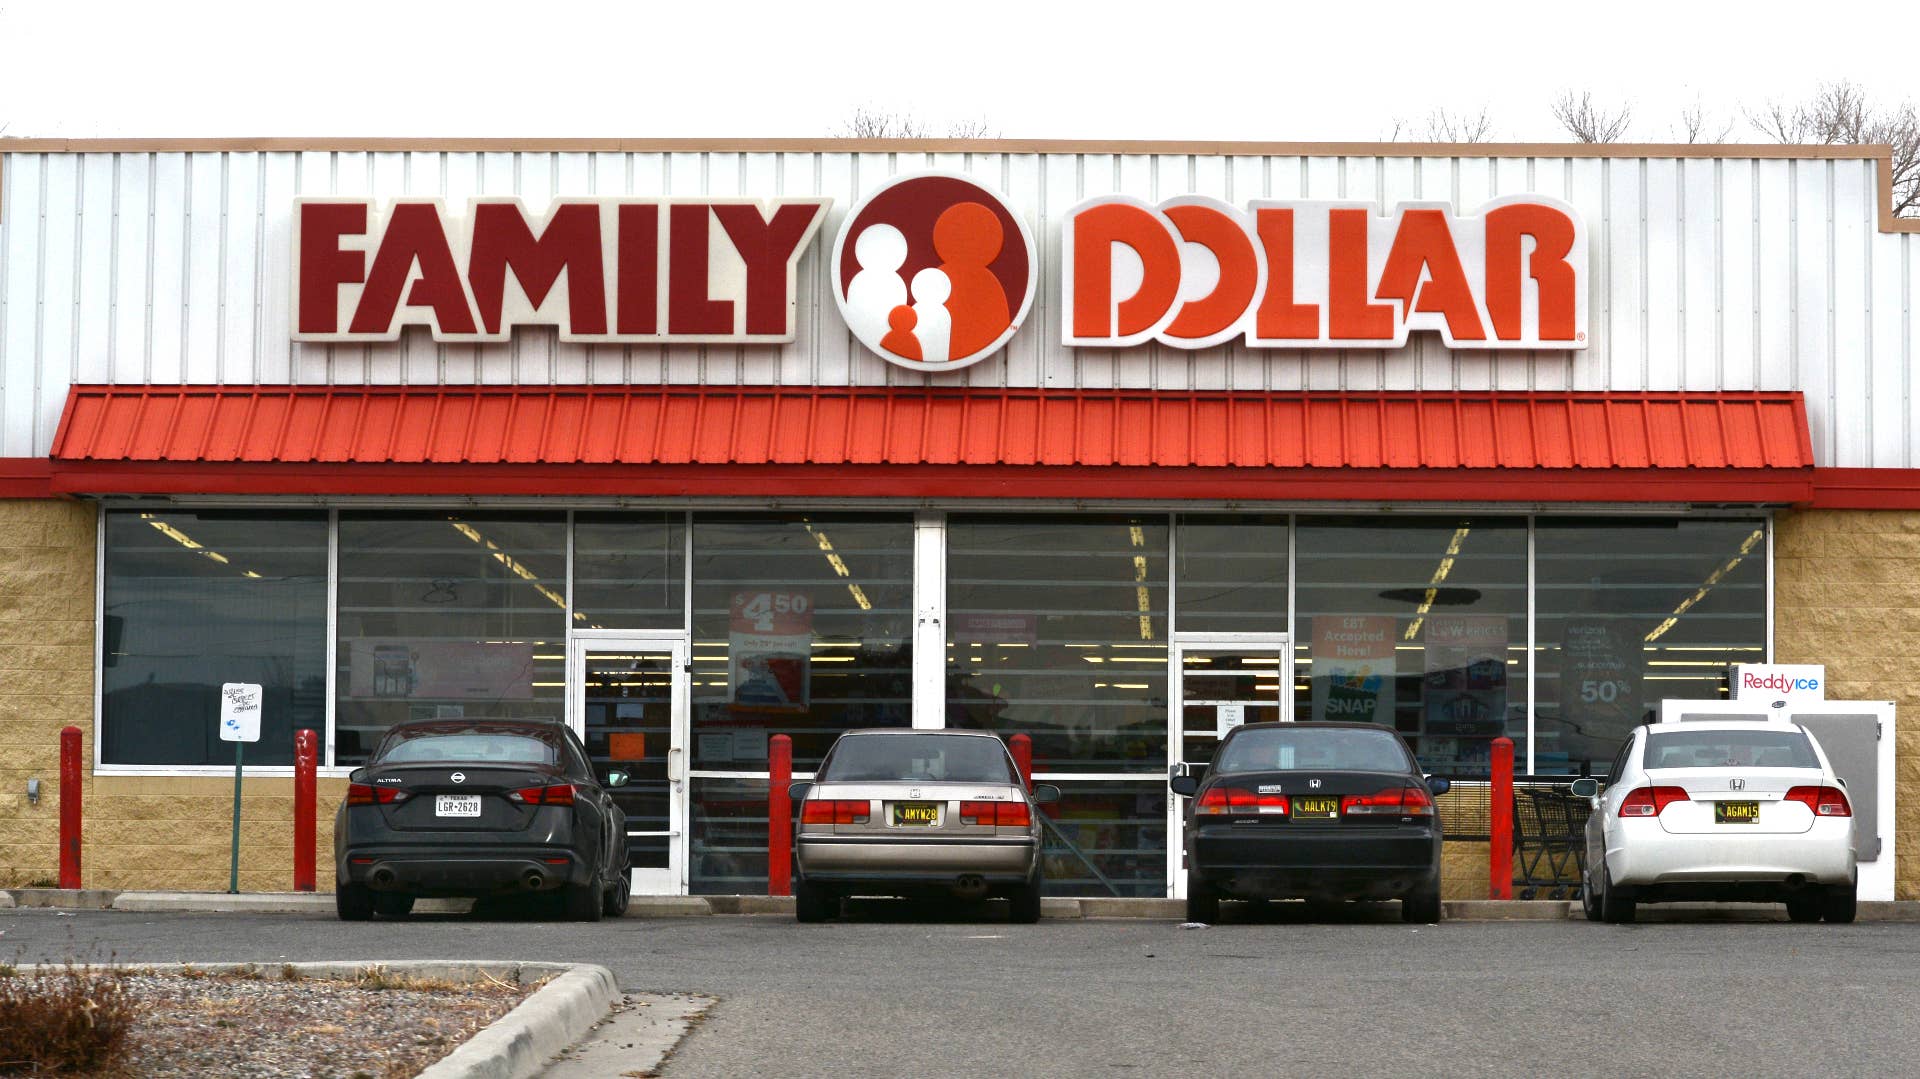 A Family Dollar store in Chimayo, New Mexico.